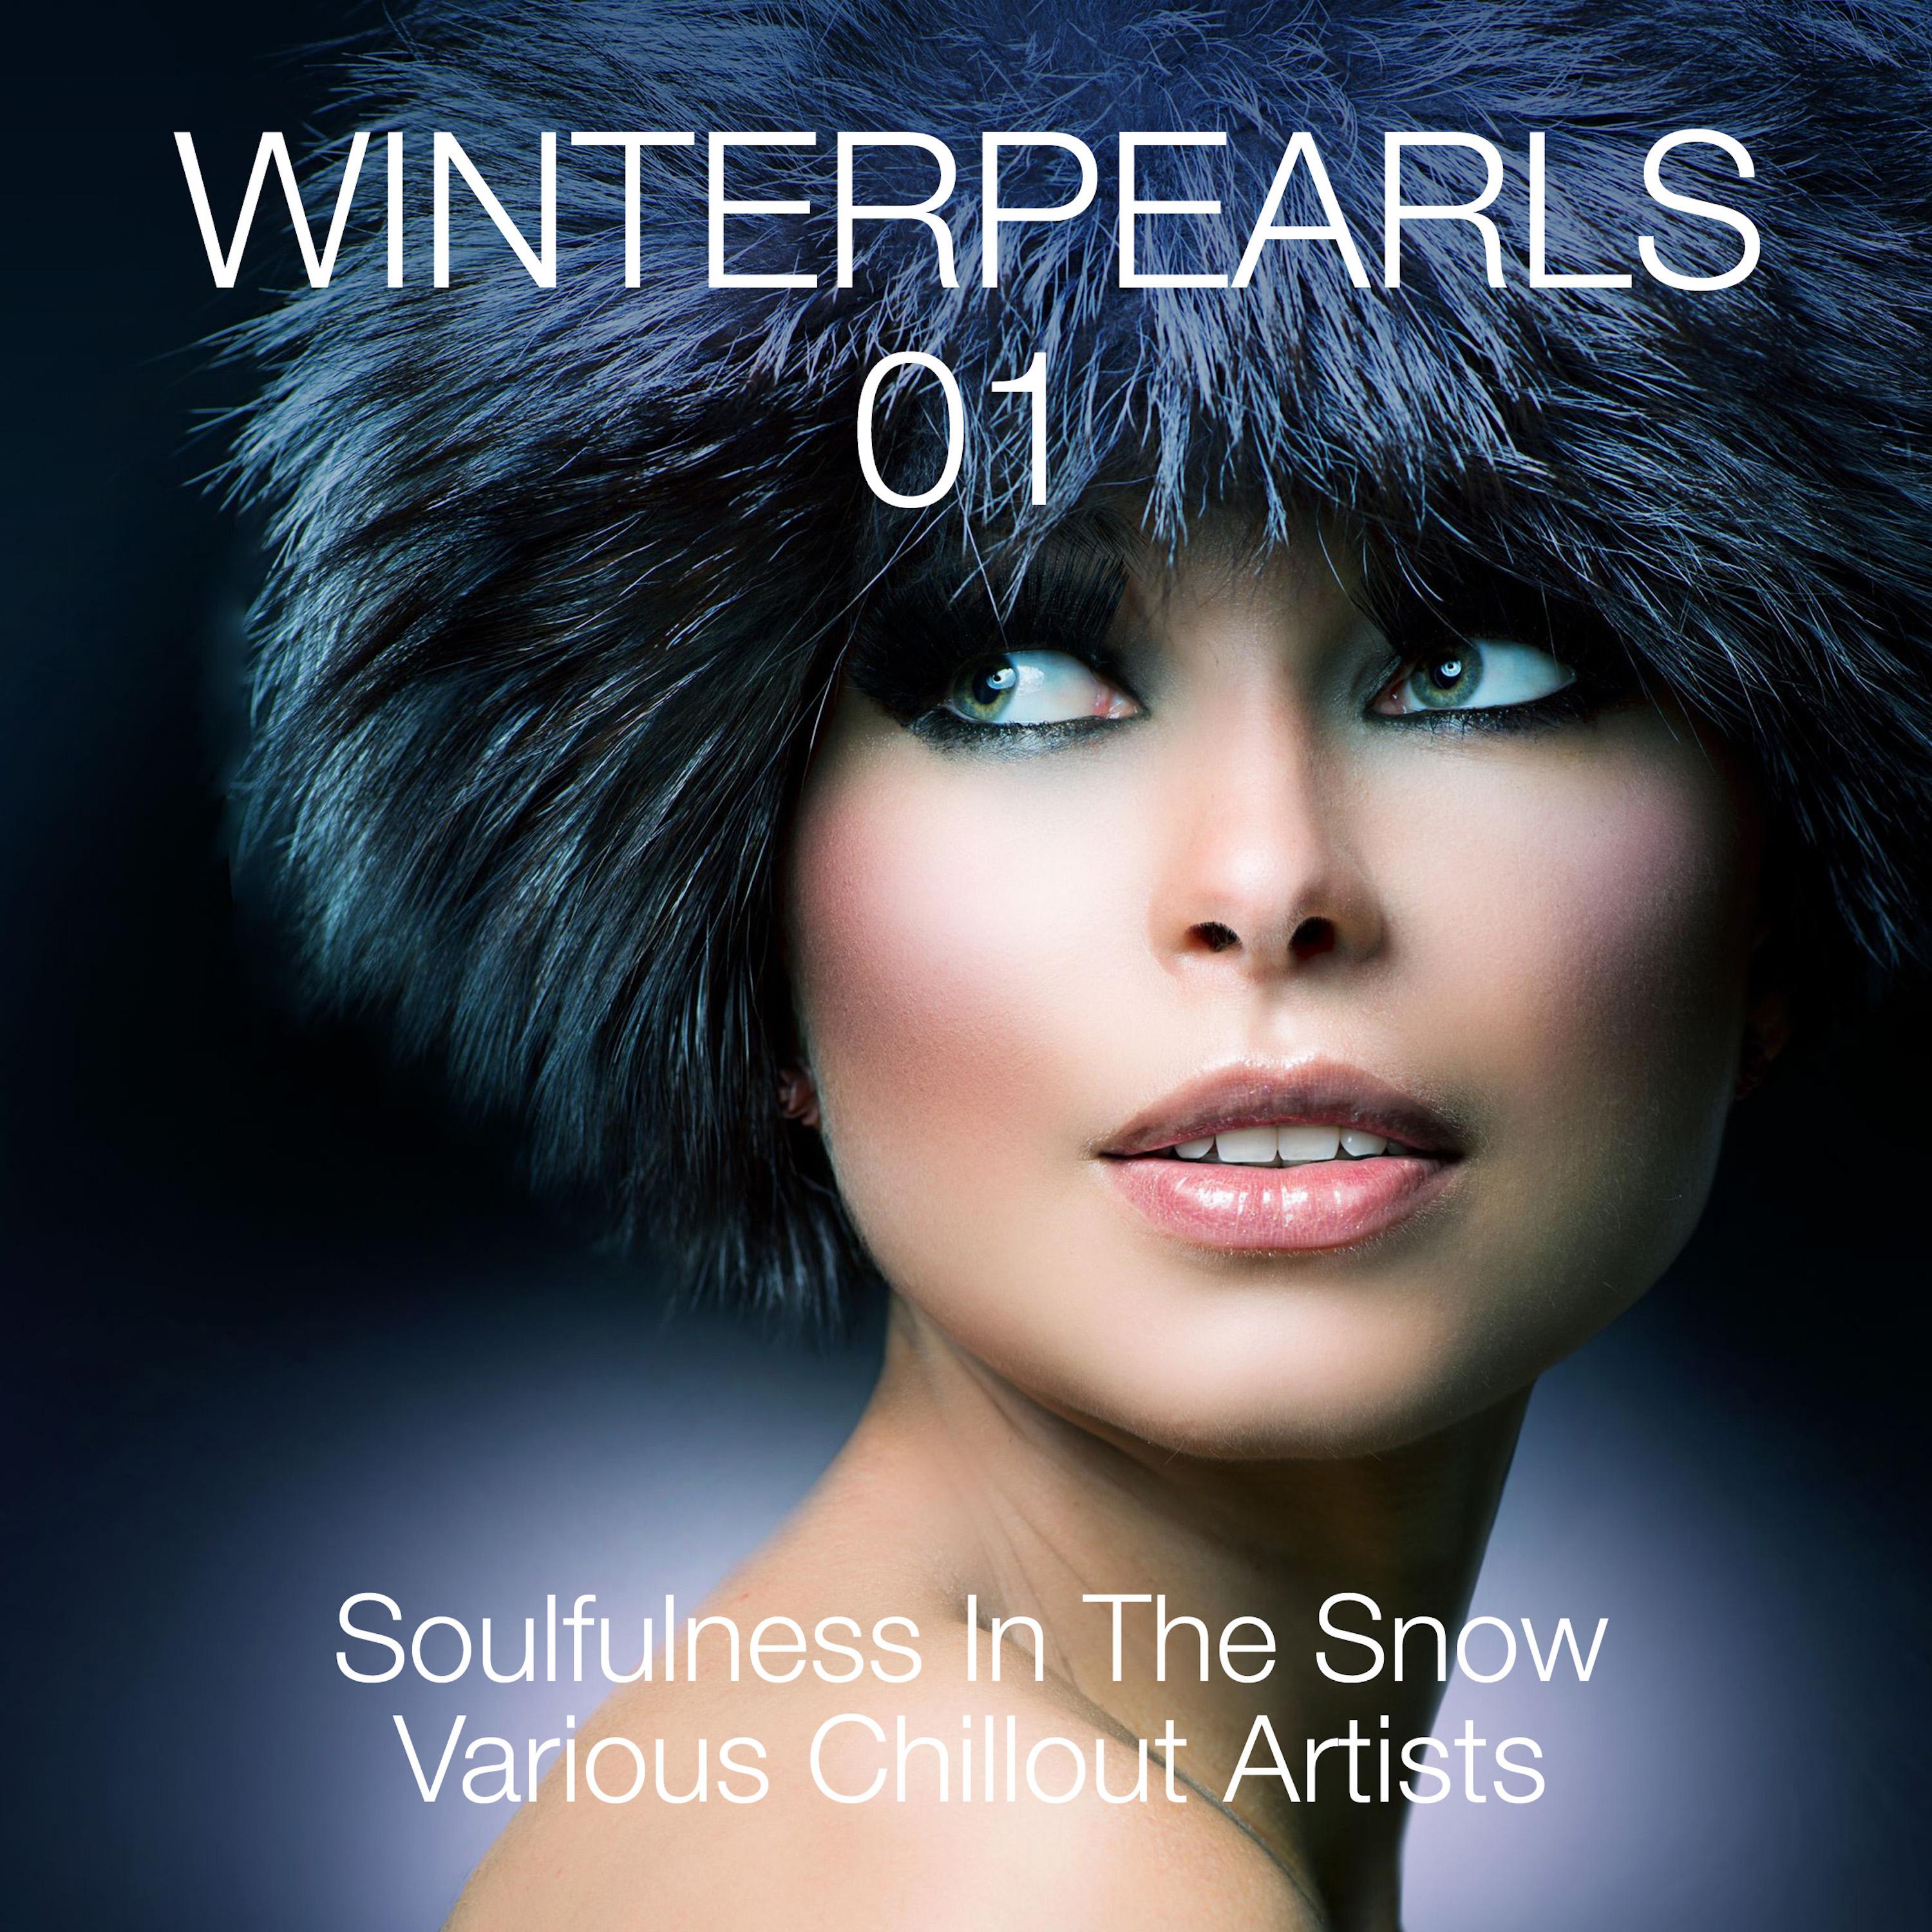 Winterpearls, Vol. 1 - Soulfulness in the Snow - Various Chillout Artists